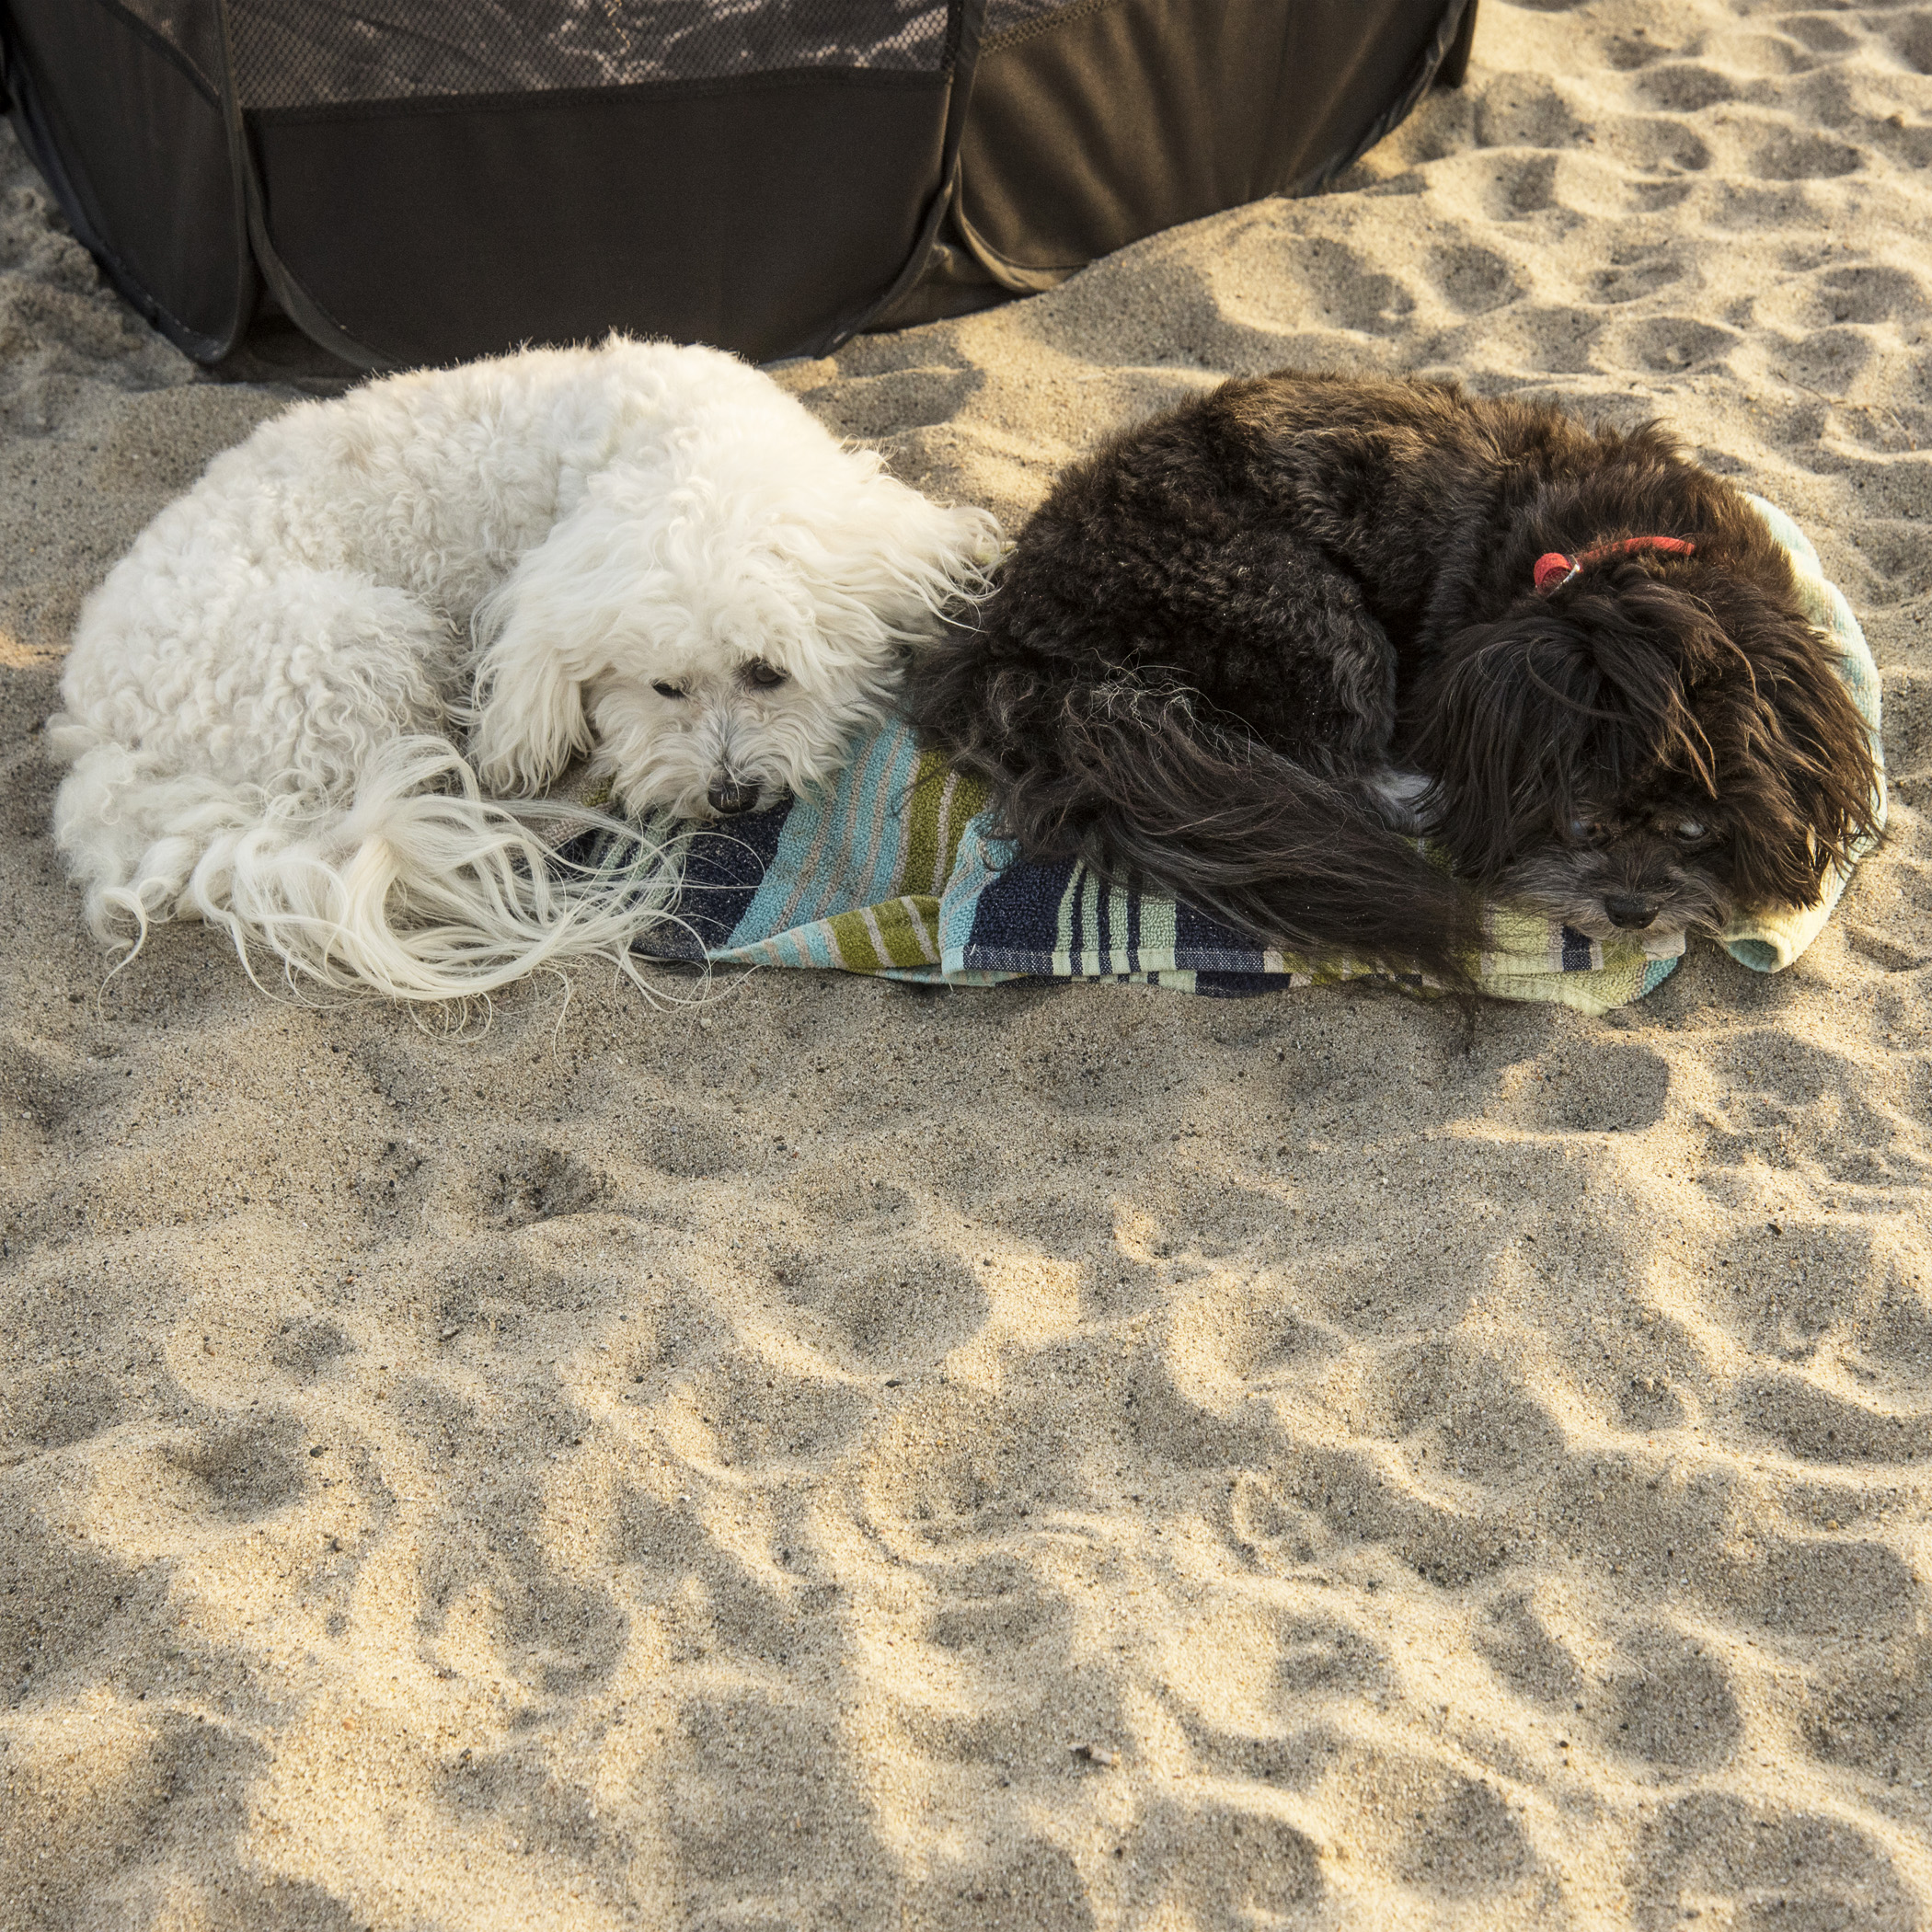  Beach time is exhausting!! (This is not staged. Benji found the towel all on his own, and curled up. Shortly later, Bruiser joined him with the exact same pose.) 